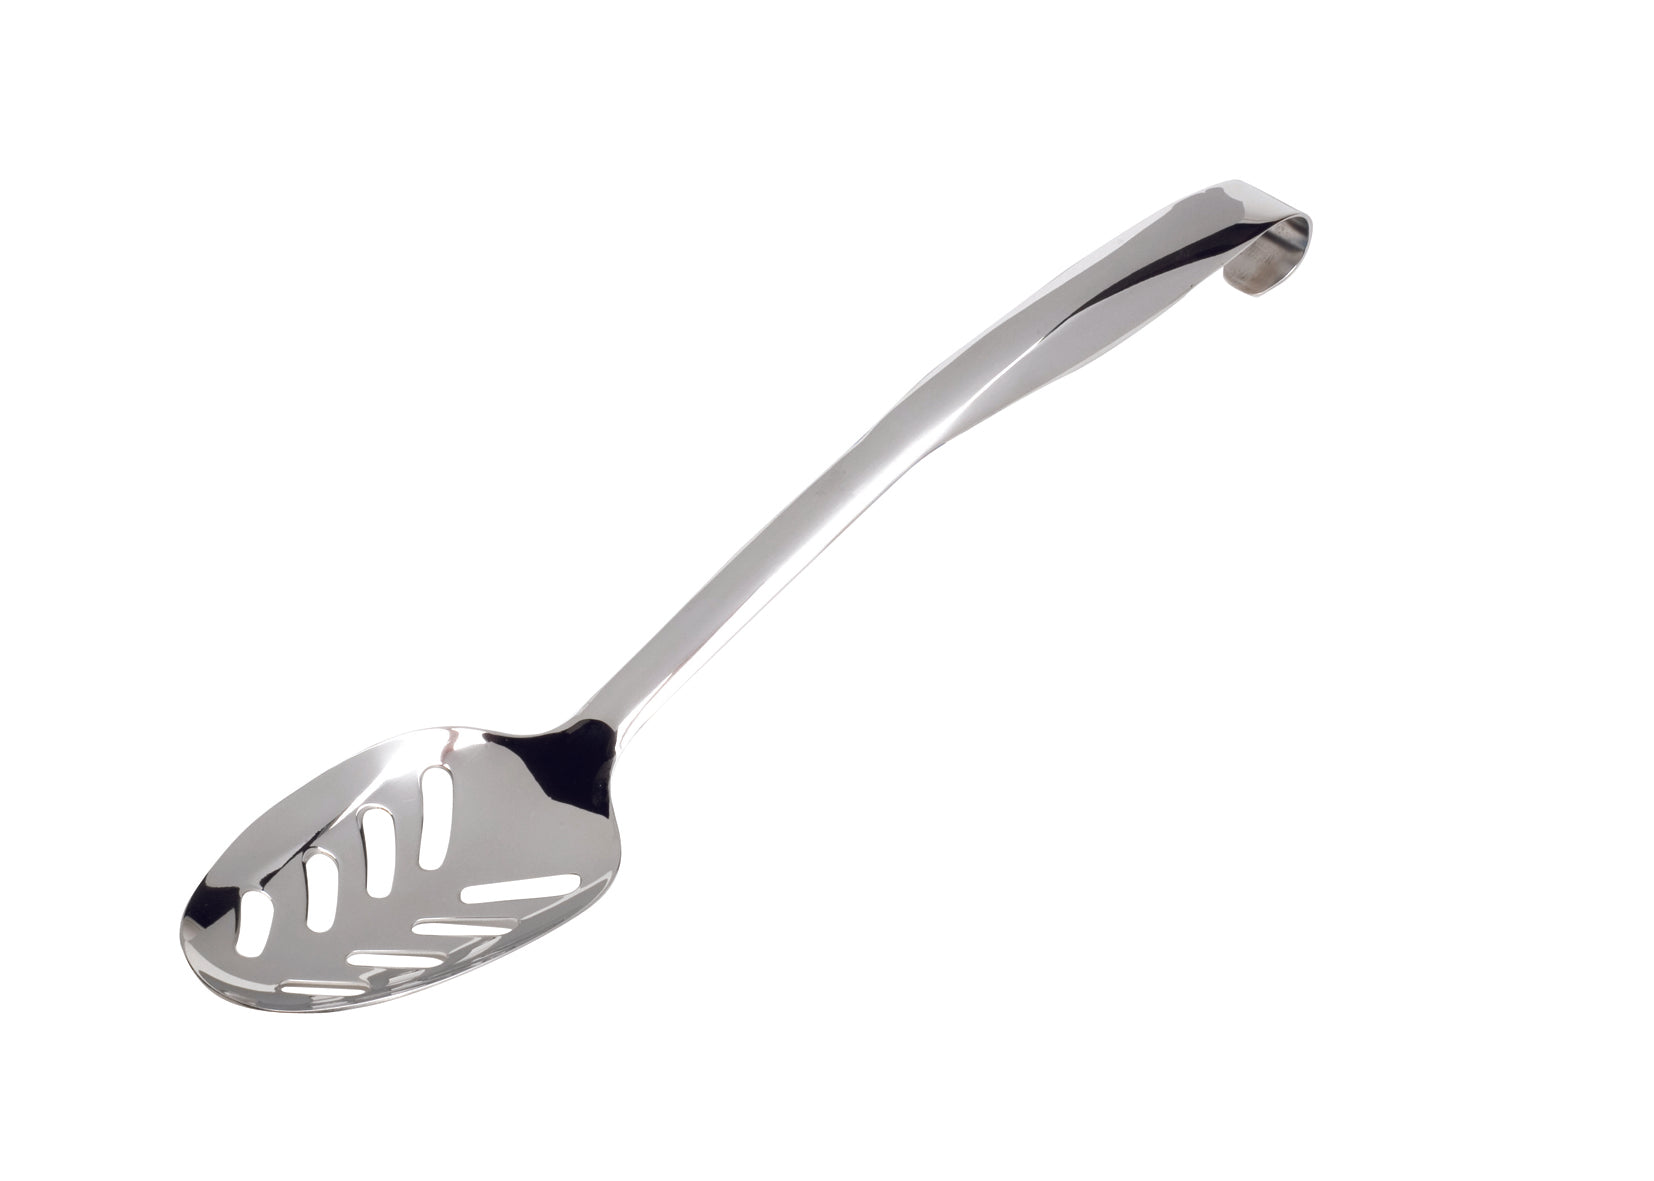 Genware  Slotted Spoon, 350mm